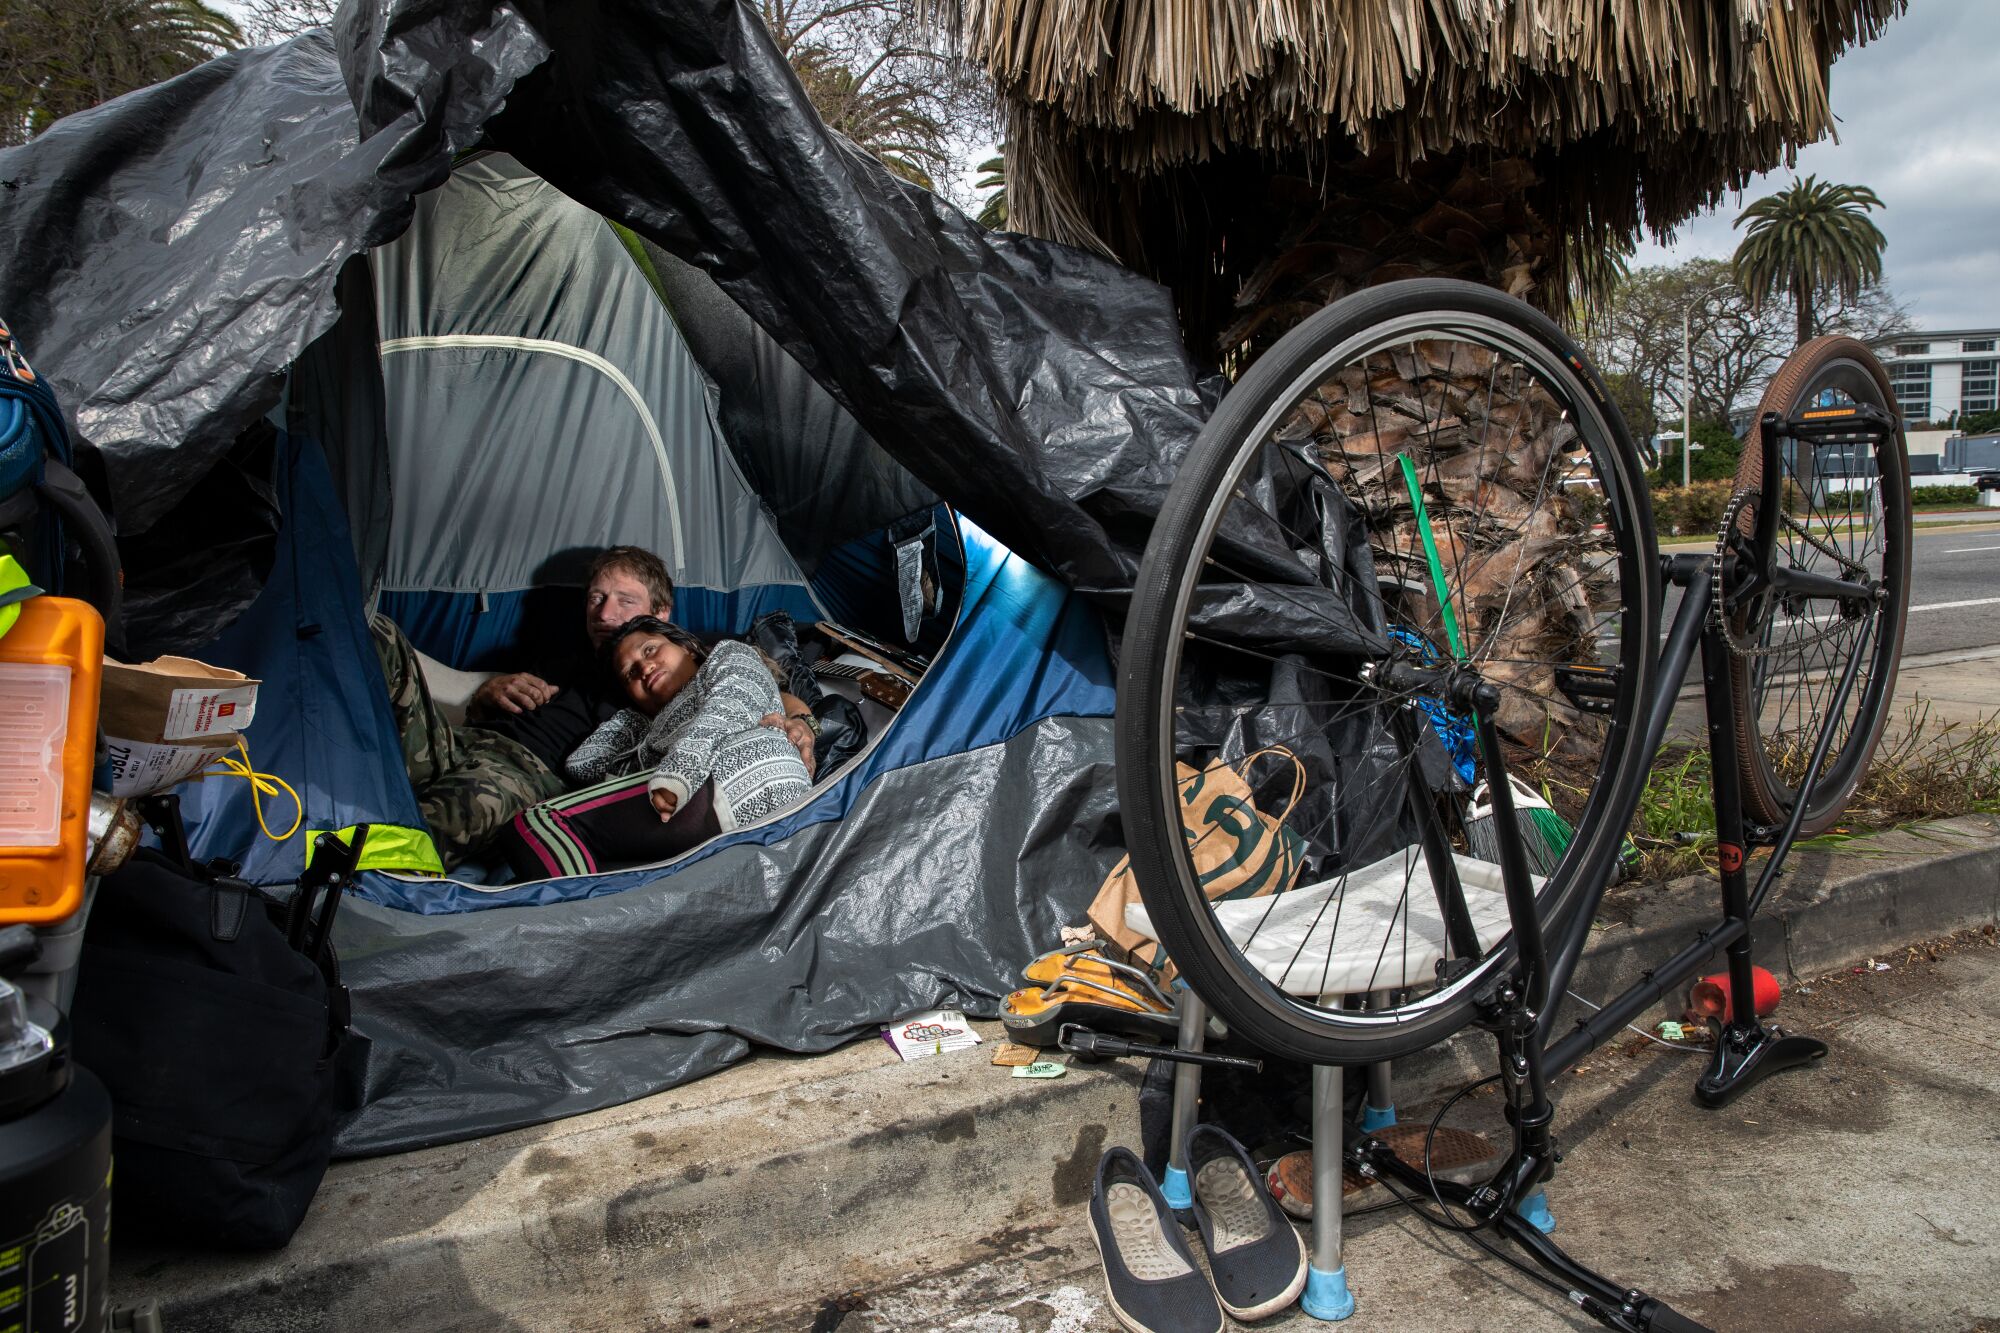 Two people lie in a tent beside a street with a bicycle and other belongings on the sidewalk